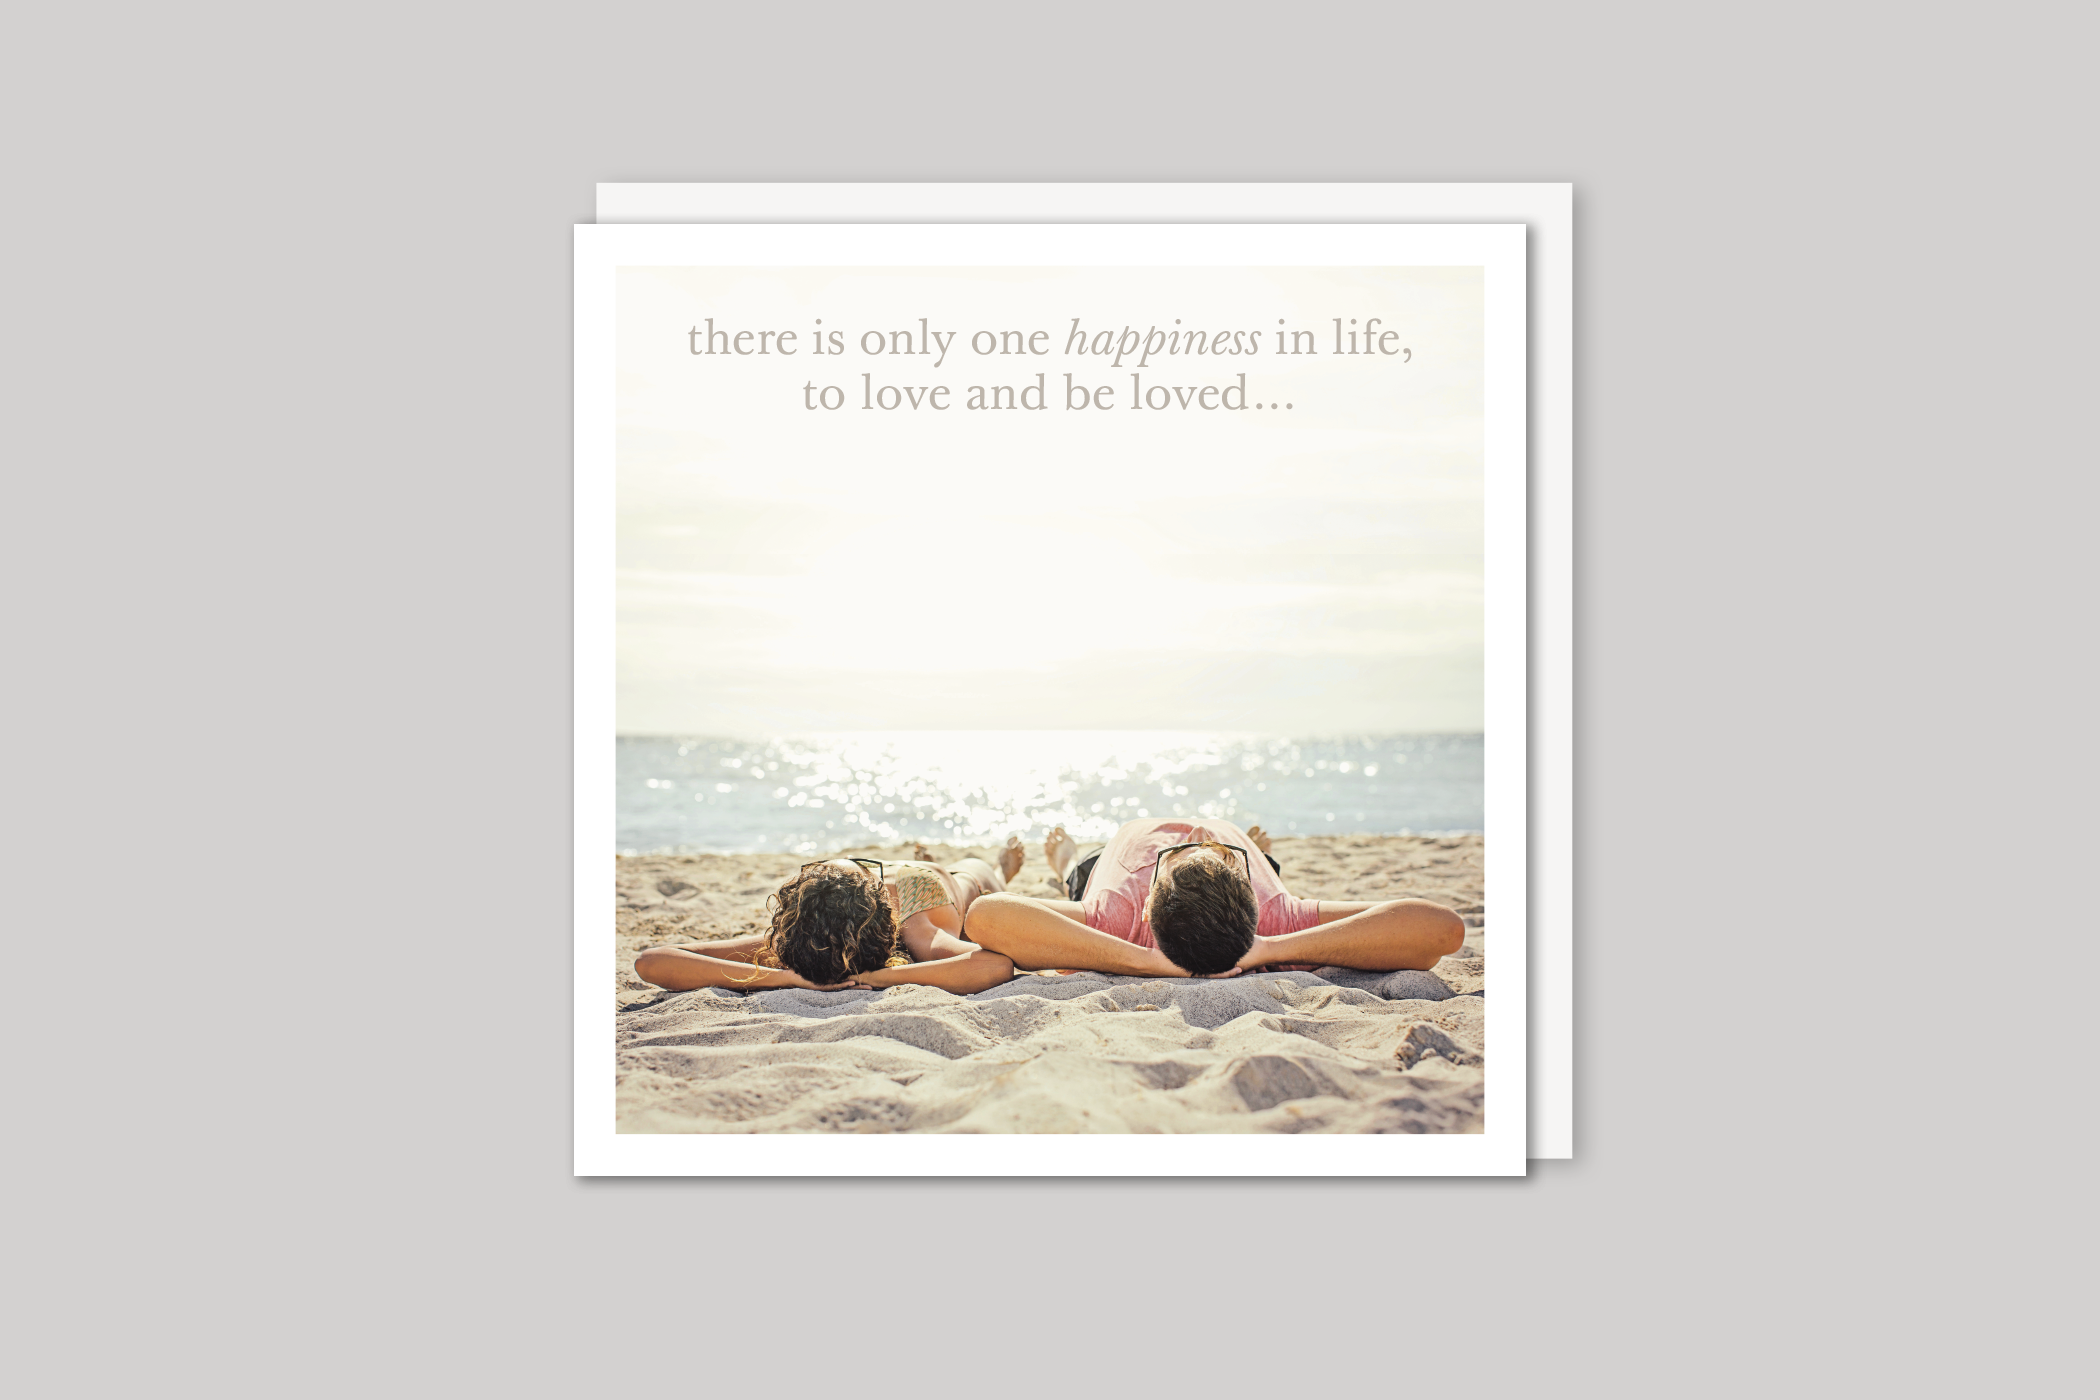 One Happiness from Every Picture range of greeting cards  by Icon, back page.